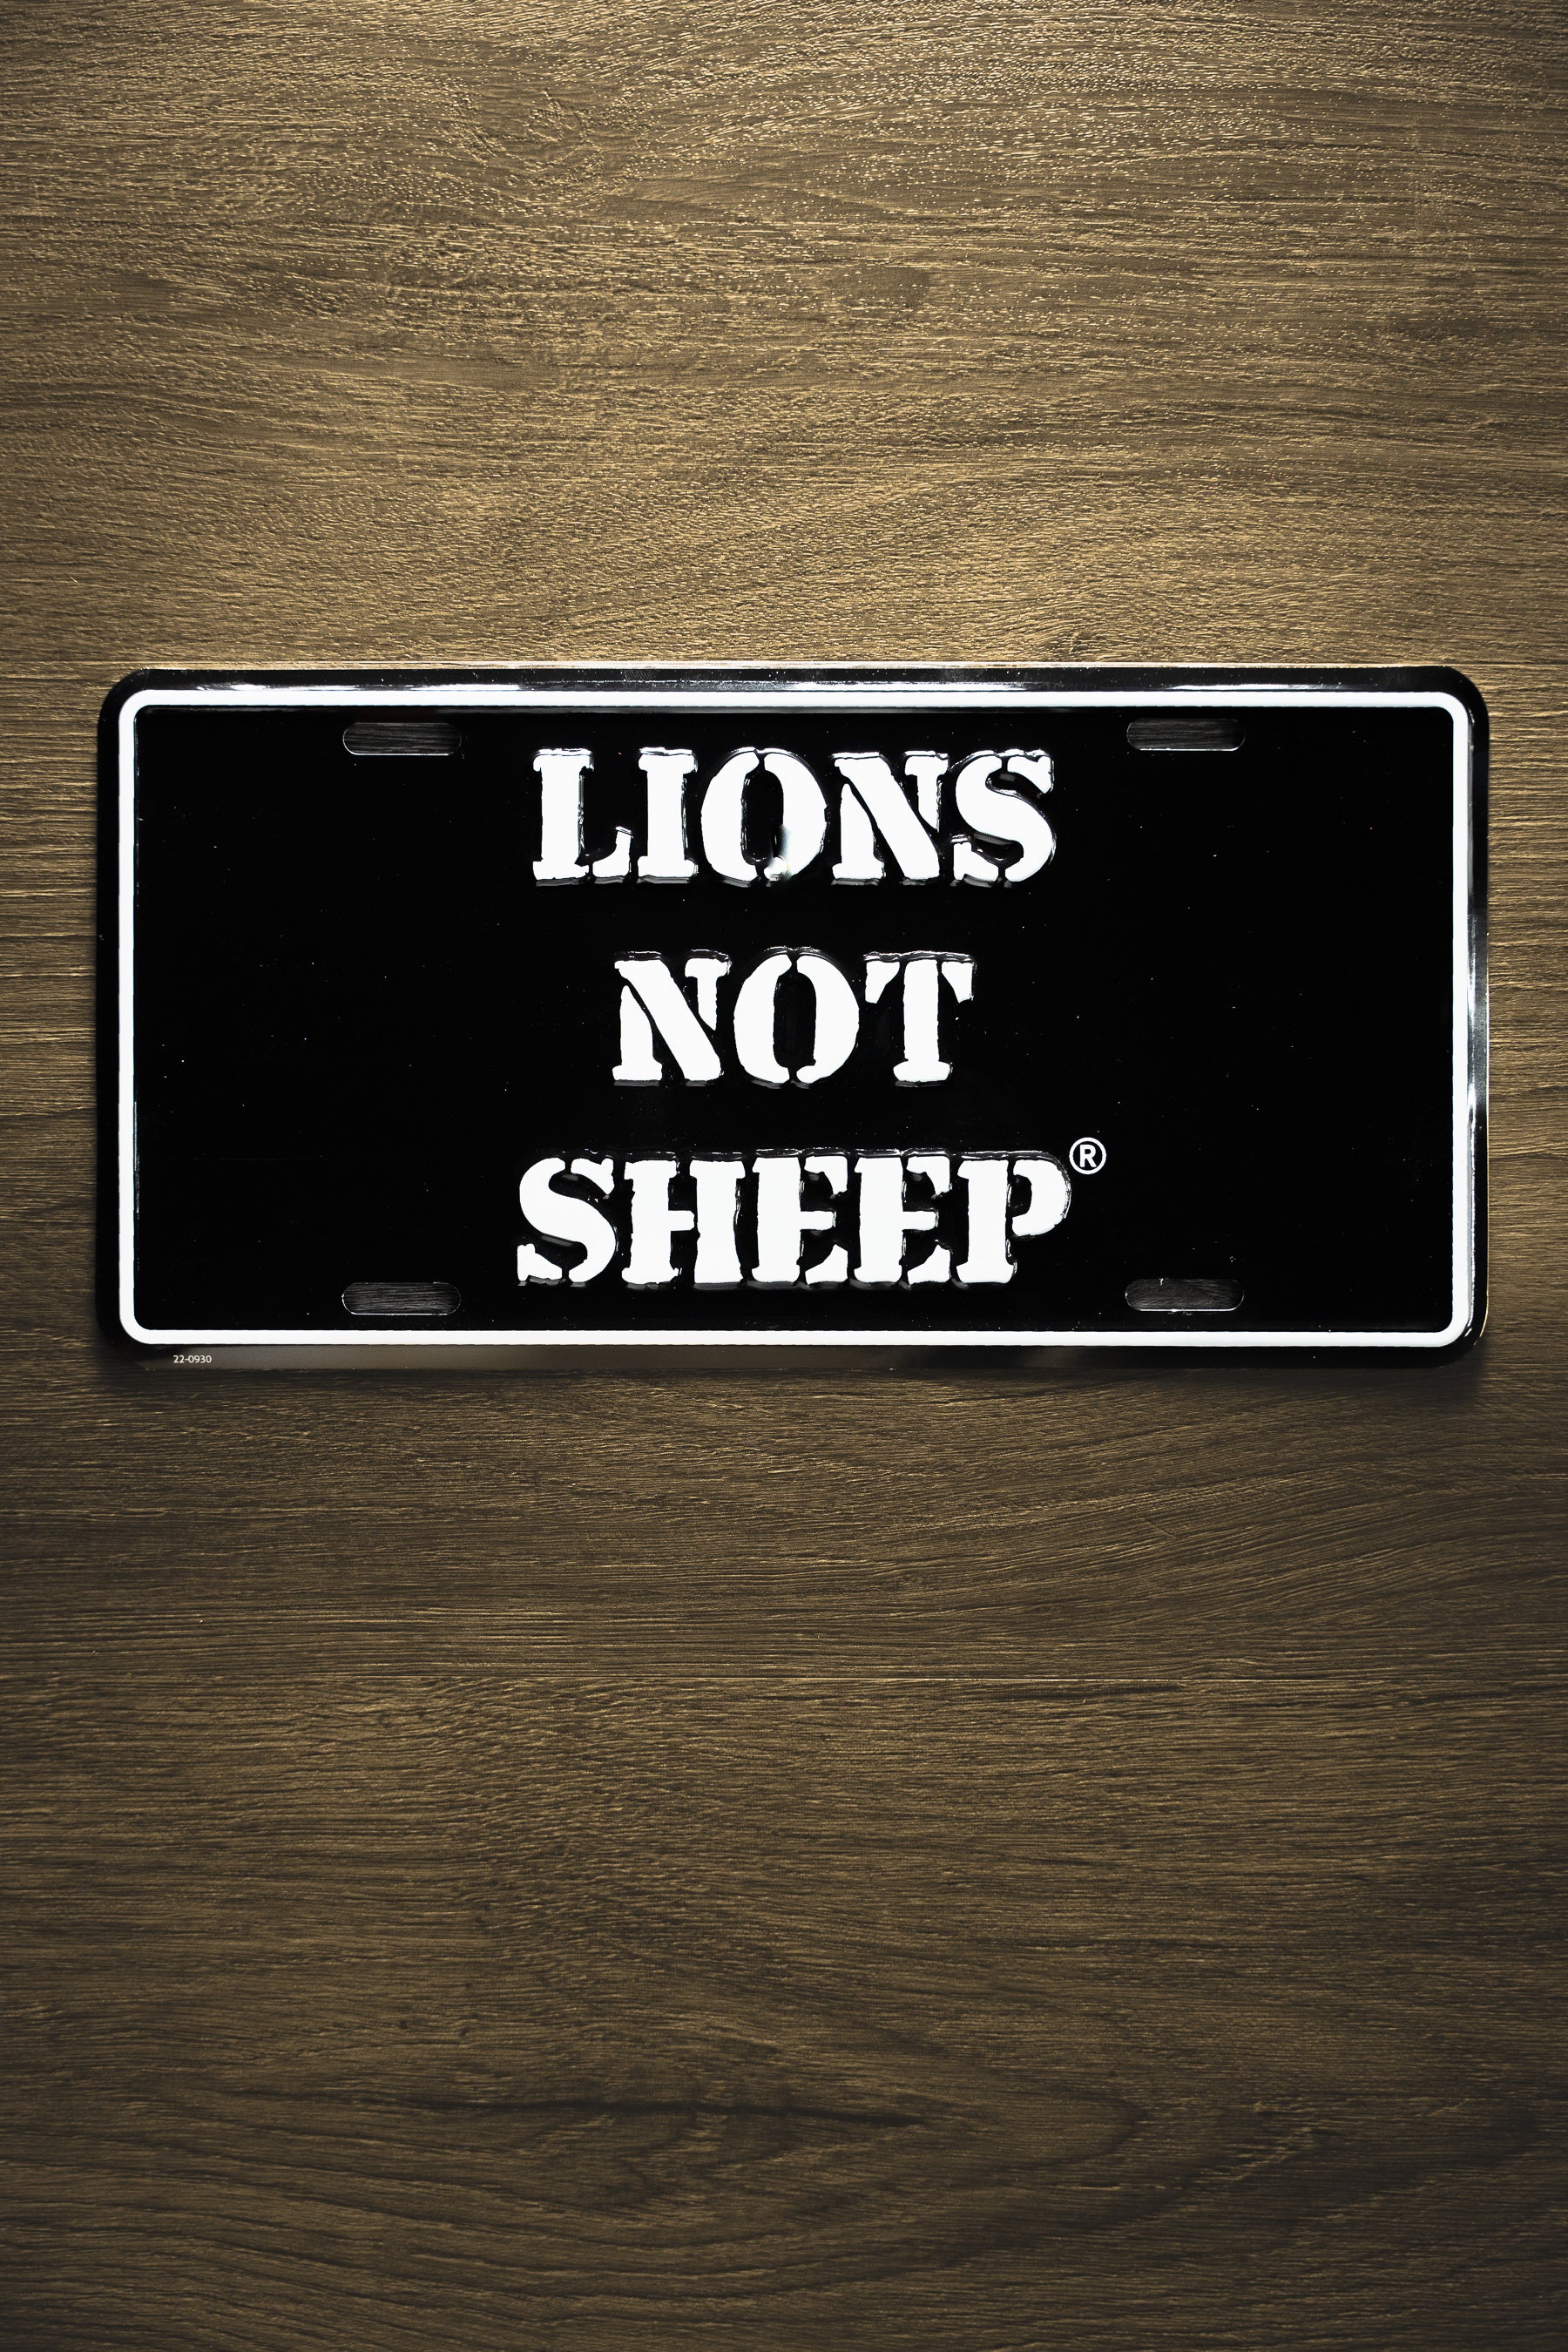 Lions Not Sheep "OG" License Plate - Lions Not Sheep ®